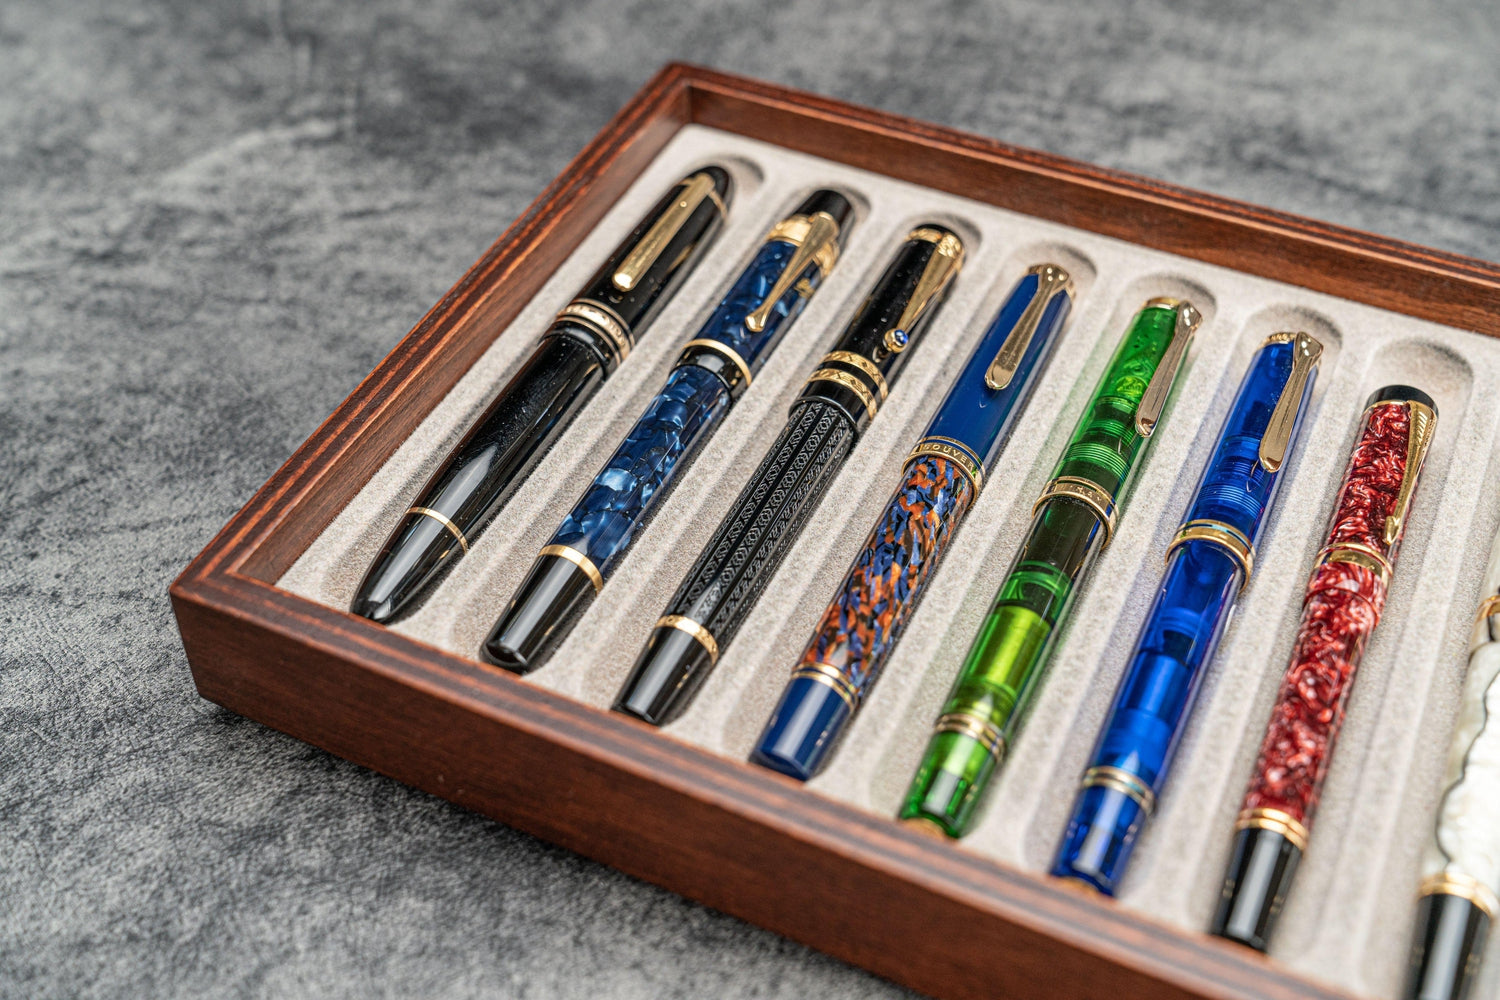 Wood Pen Display Case w/ Clear Lid - Holds 11 Pens